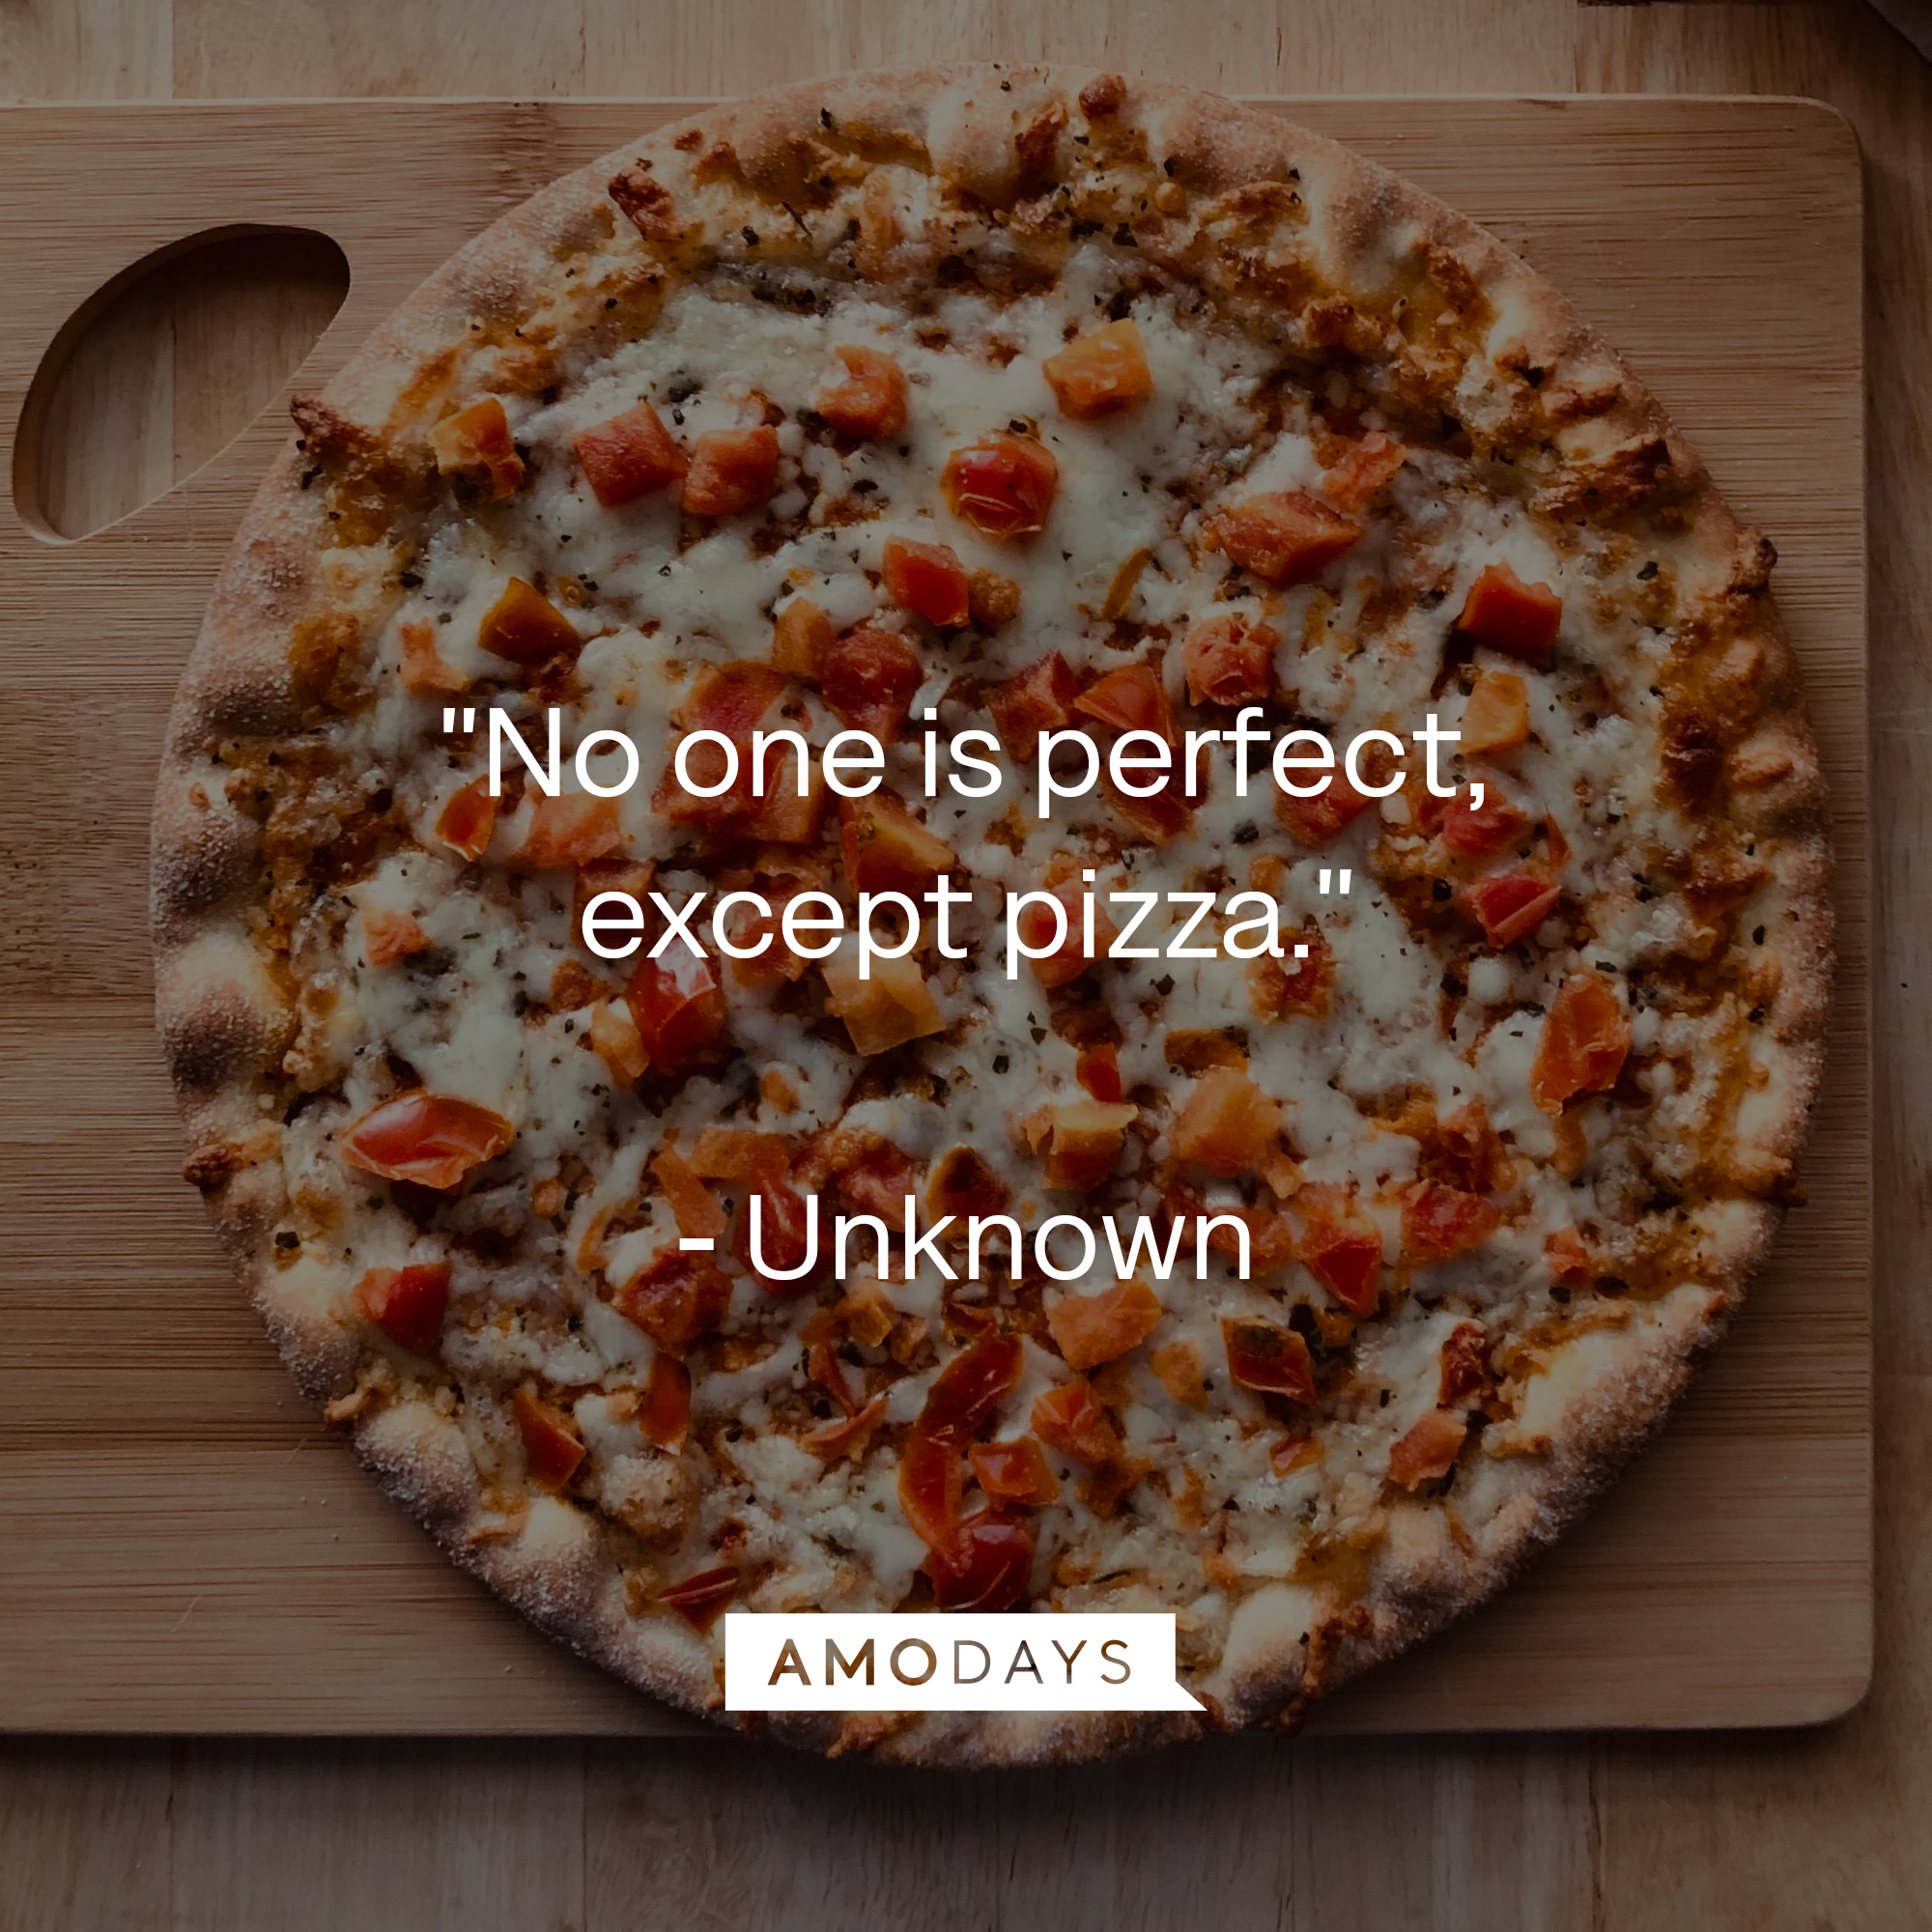 Unknown's quote: "No one is perfect, except pizza." Source: Toasttab